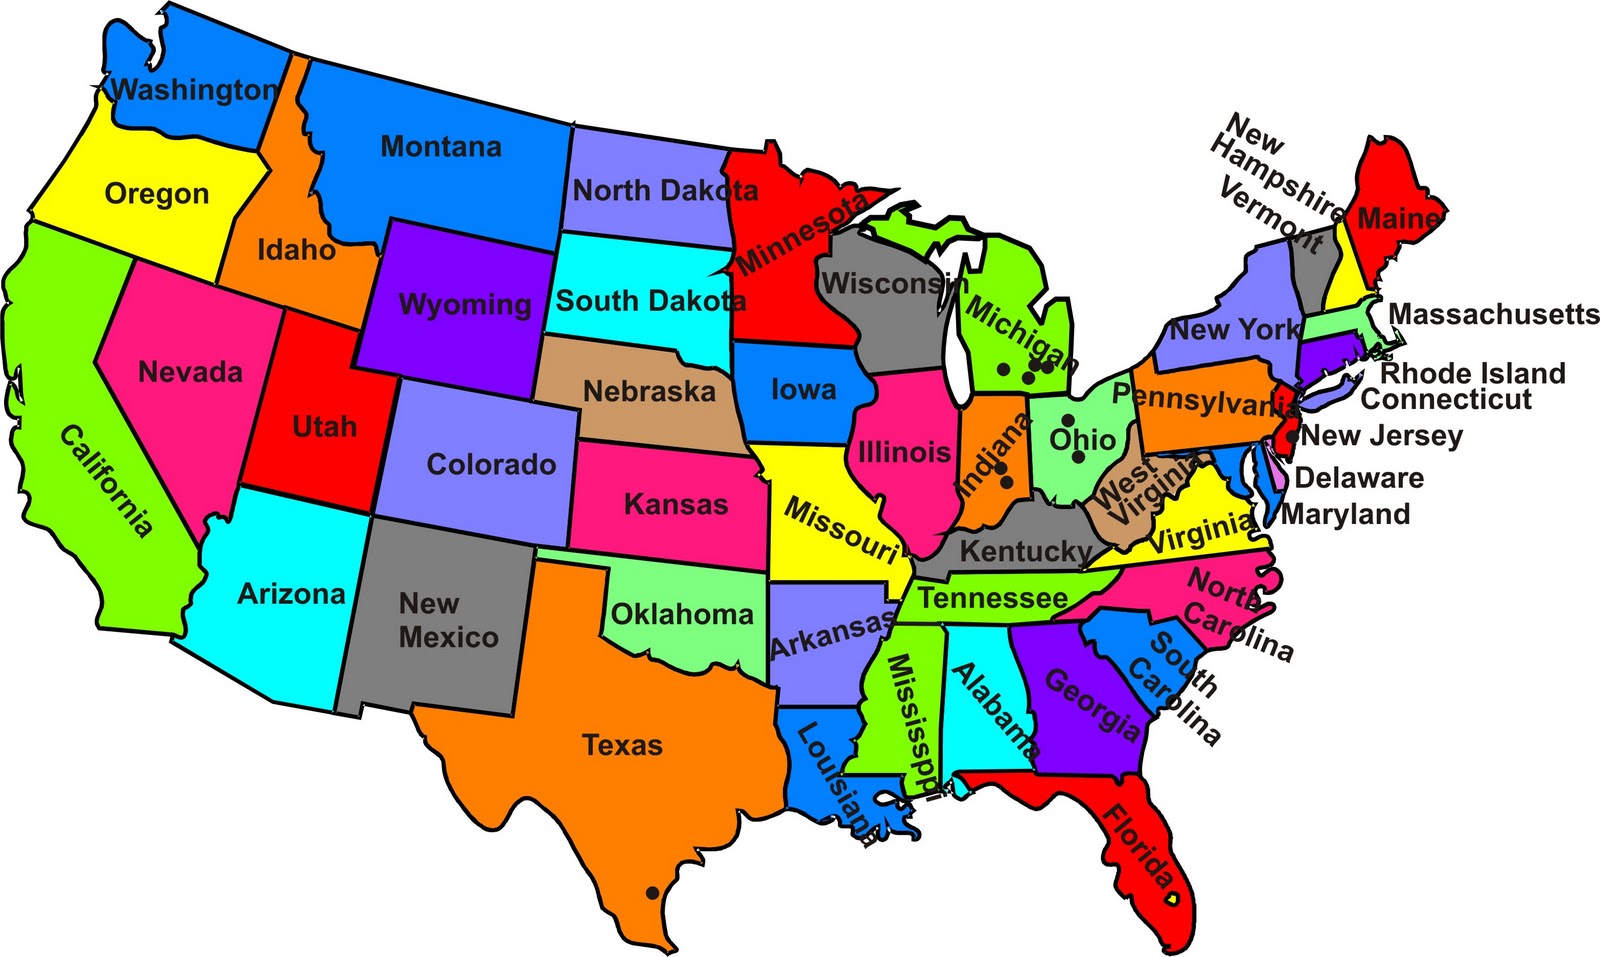 Printable Map Of The United States Of America - ClipArt Best